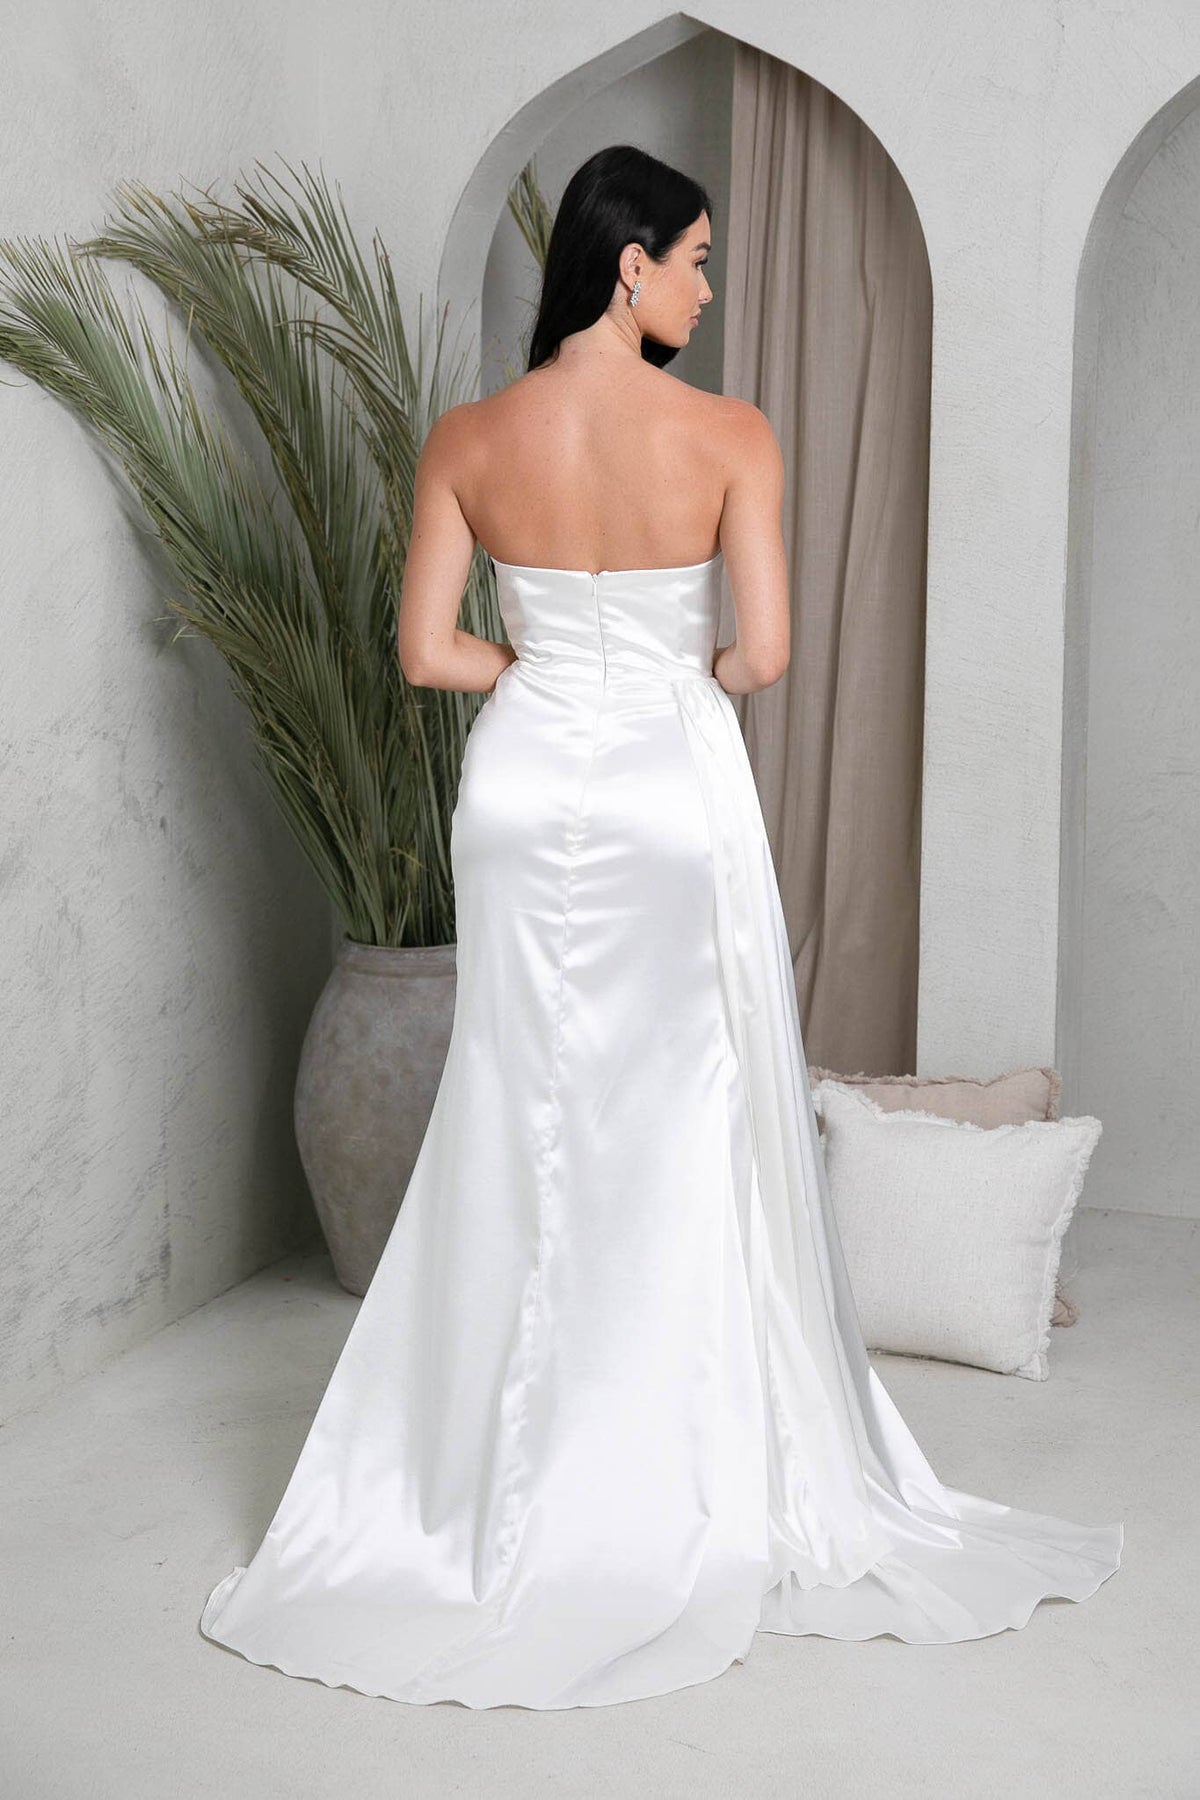 Back Image of Ivory White Shiny Satin Long Gown with Strapless Neckline, Gathering Detail, High Side Split and Court Train